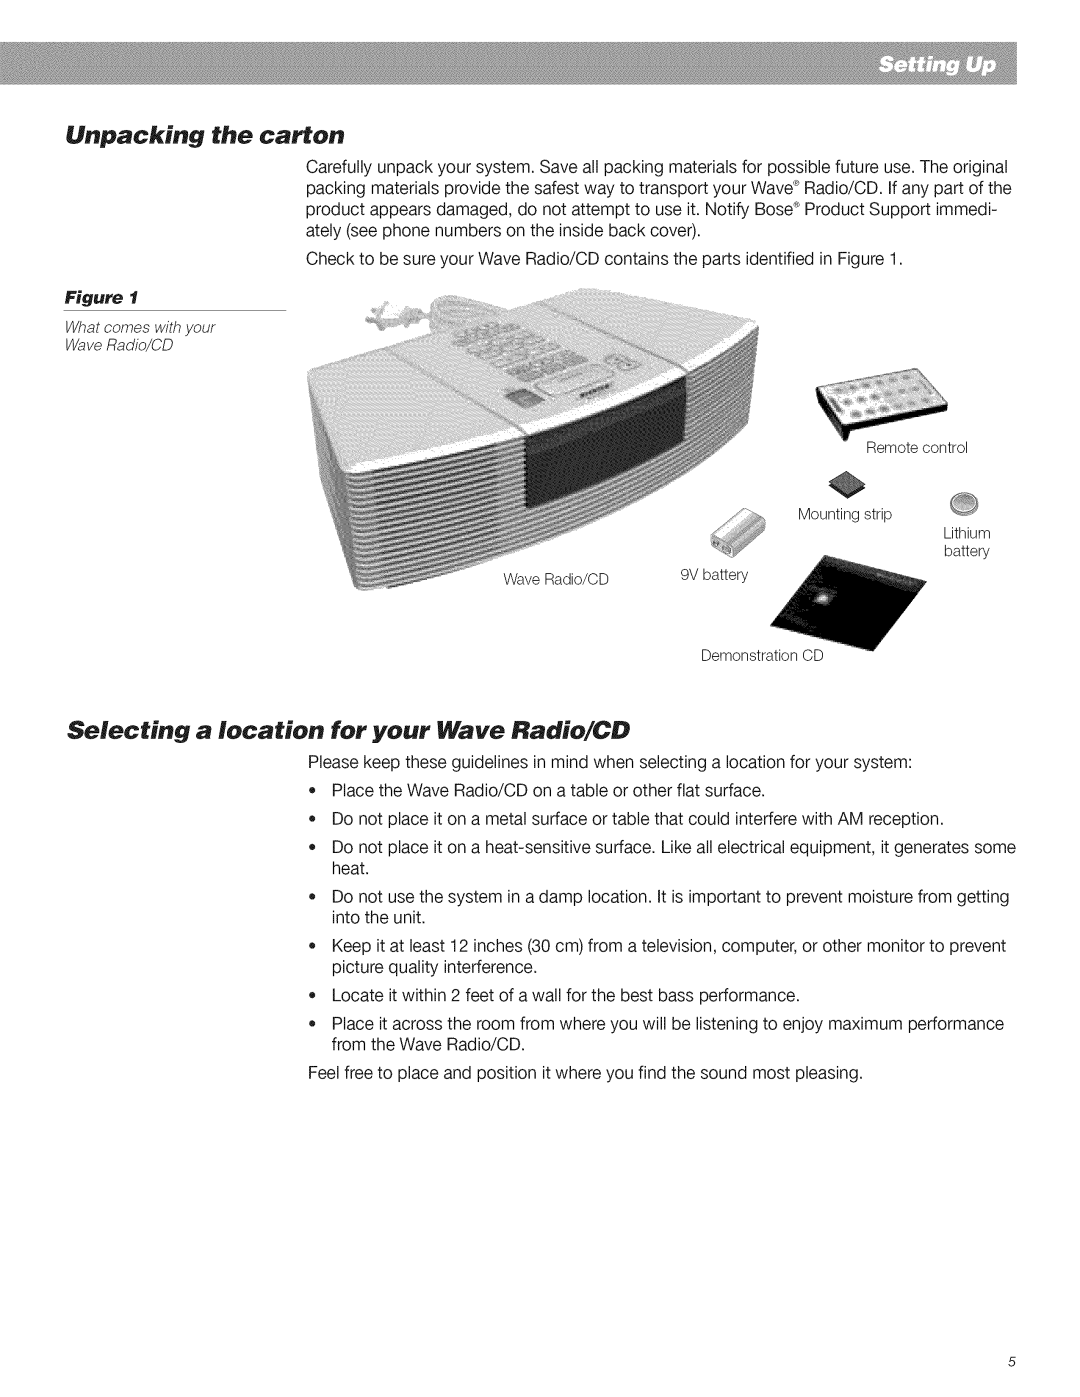 Bose CD Player manual Selecting a location for your Wave Radio/CD, Unpacking the carton 